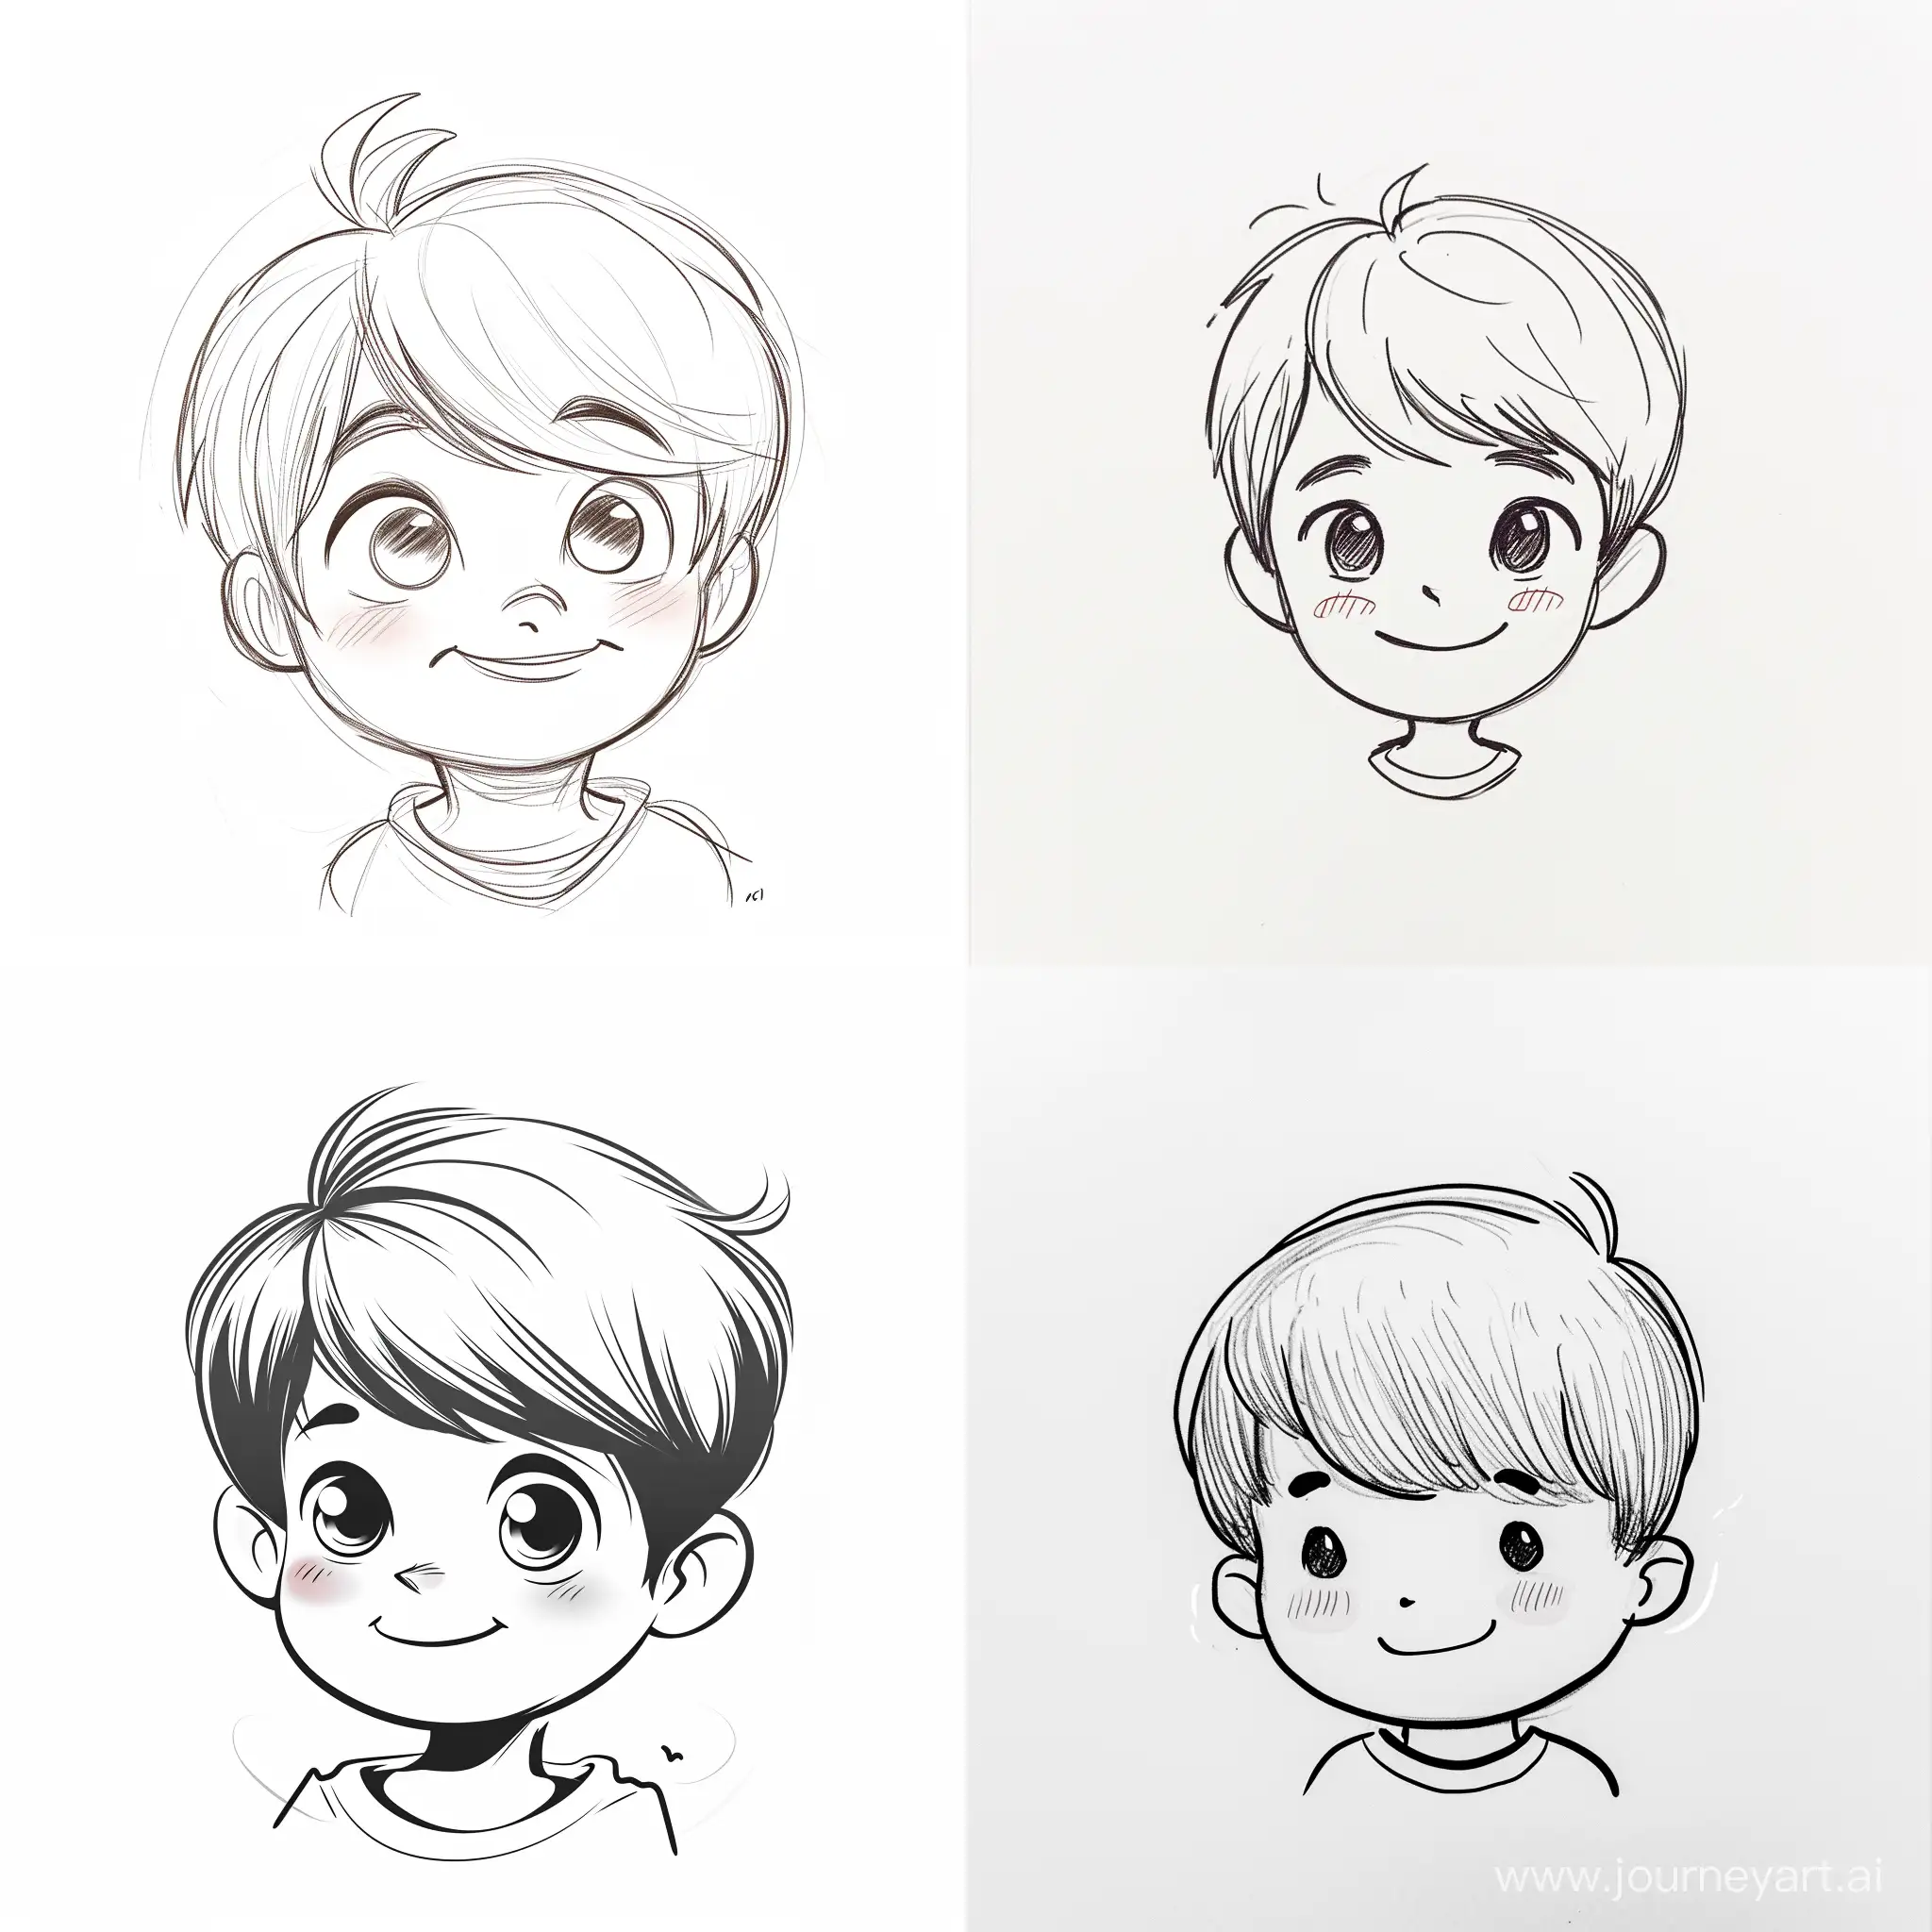 A doodle of a young cute boy character with a cute expression, blushing cheeks, side part hair style, drawn in a minimalist style on a white background, tiny eyes, looking to the left about 40 degrees from the screen, confident smile (Happy Doodle Character, Minimalist Anime Style Character, Cute Line Drawing)